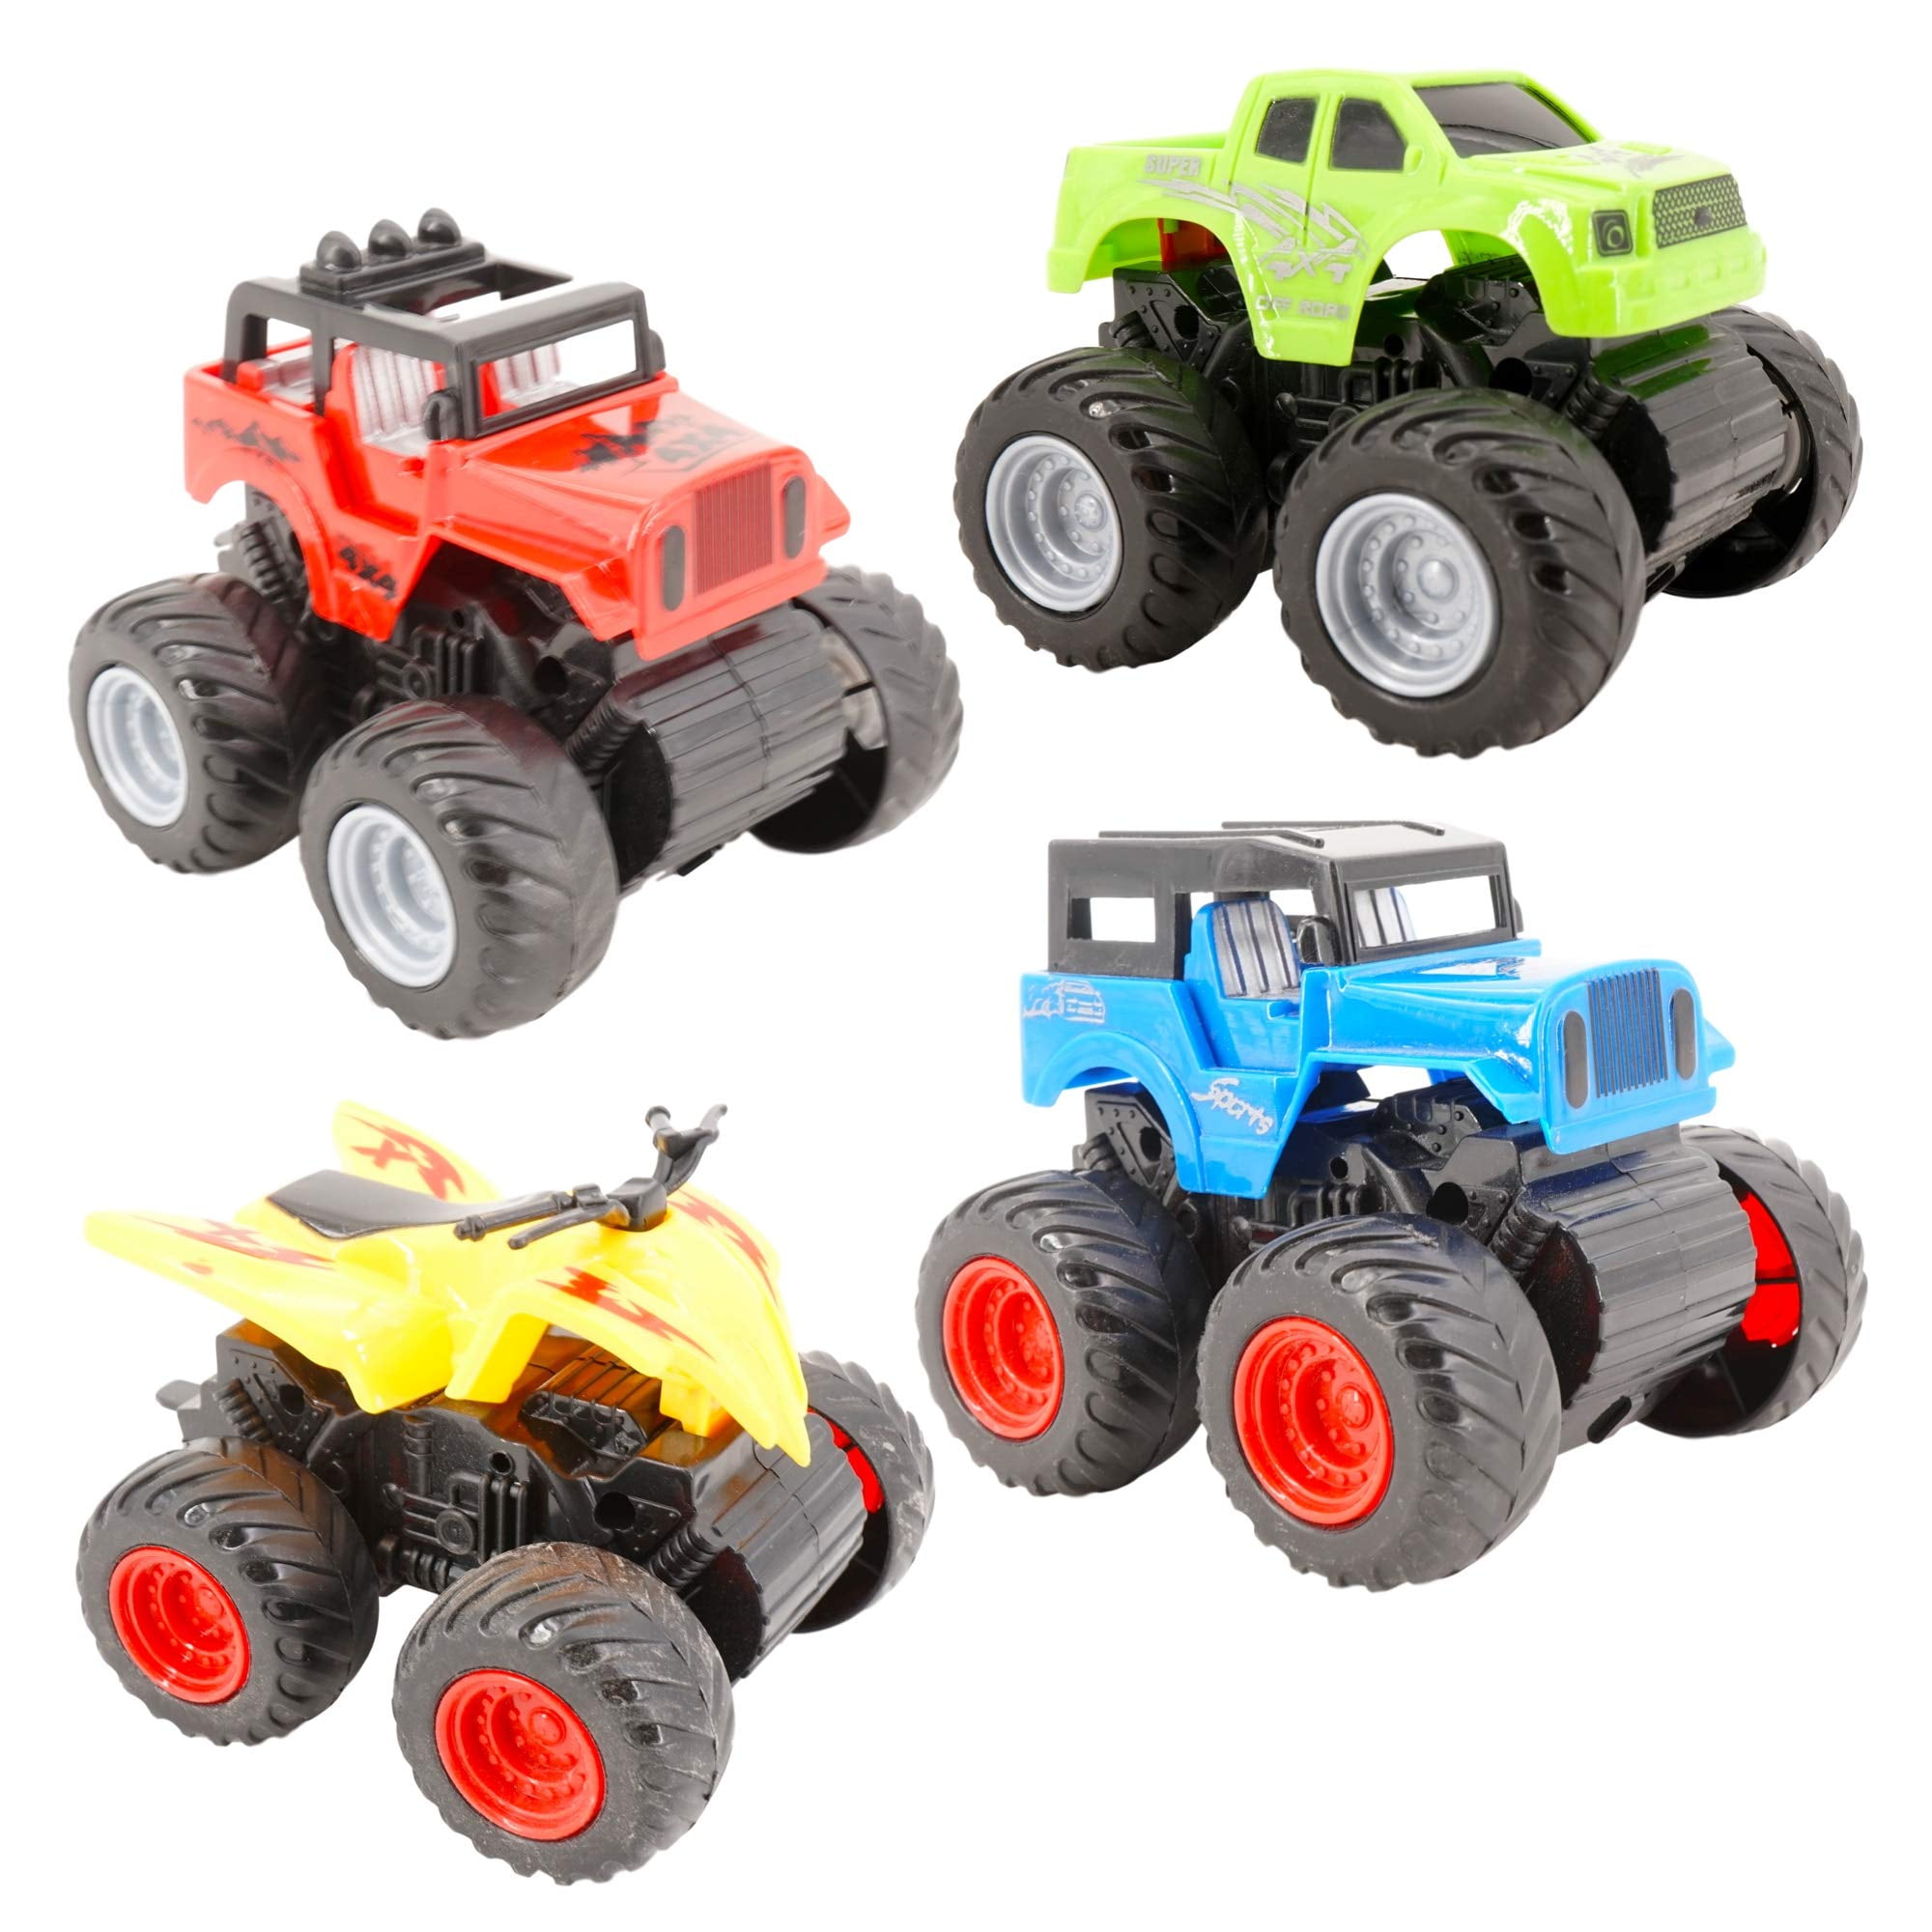 Girls or boys toy Delivery Guaranteed 4X4 Quad & Trailer.Toy 2 sets to choose 